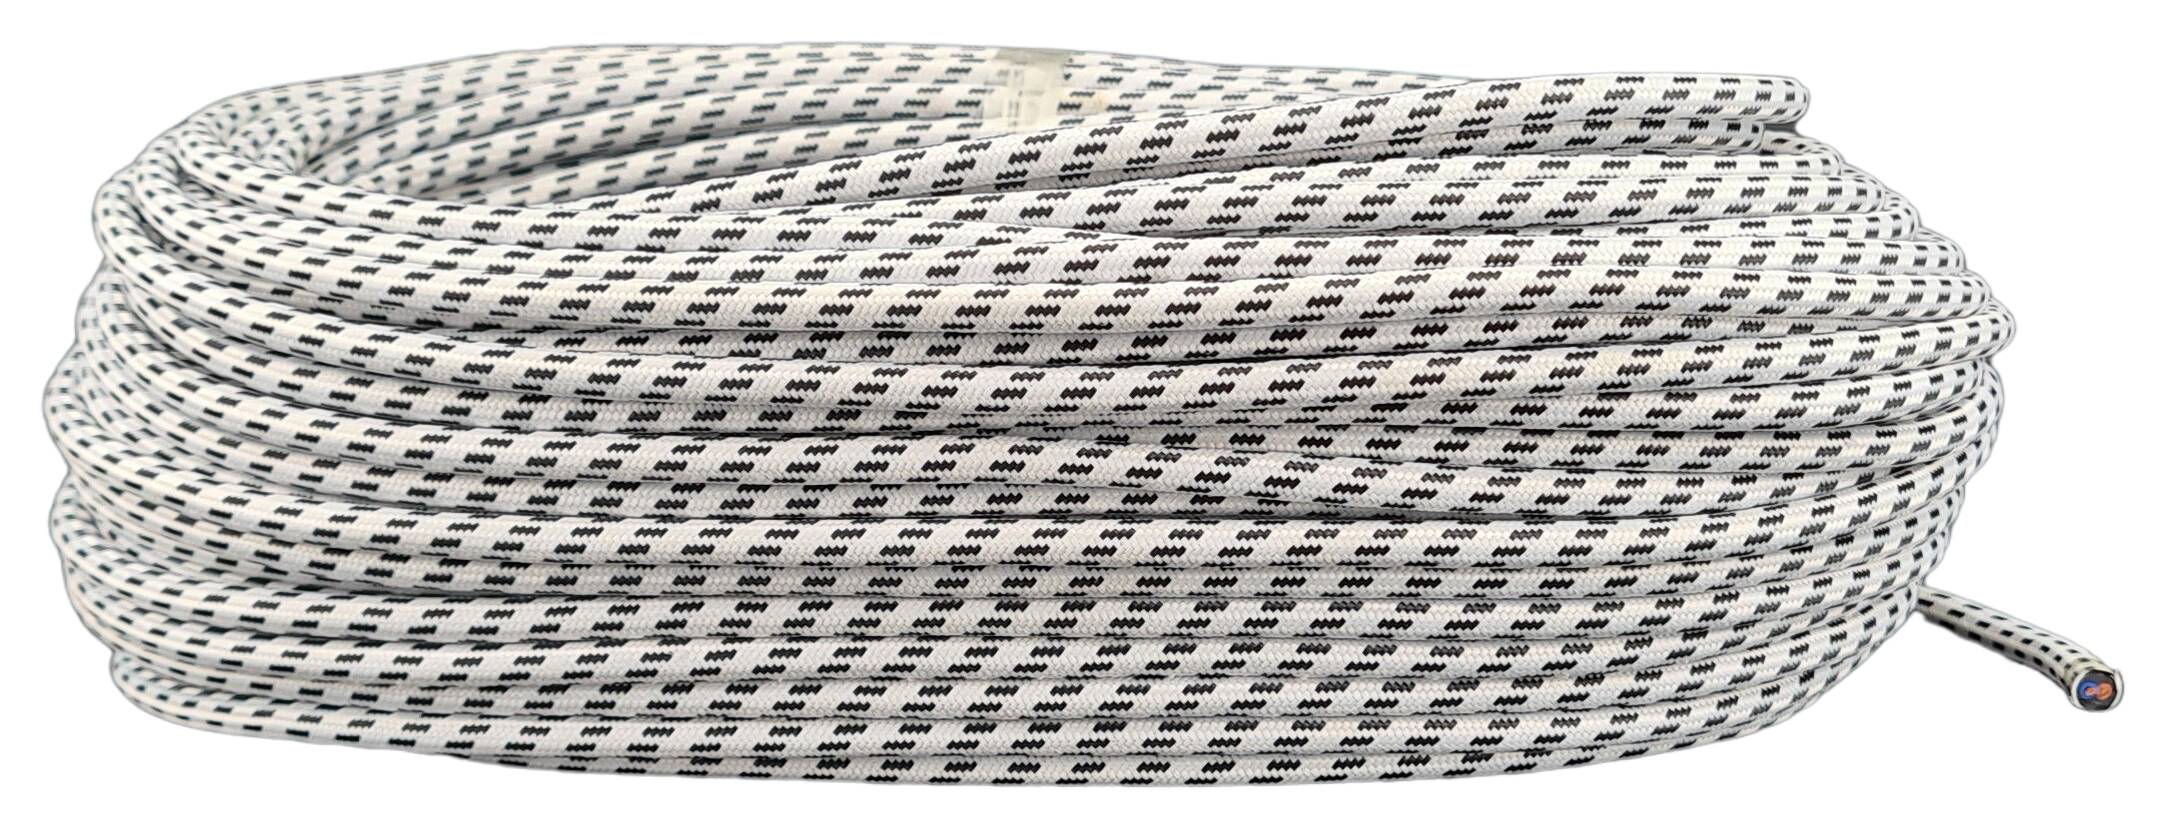 cable 2x 0,75 H03VV-F textile braided black-white (spiral)